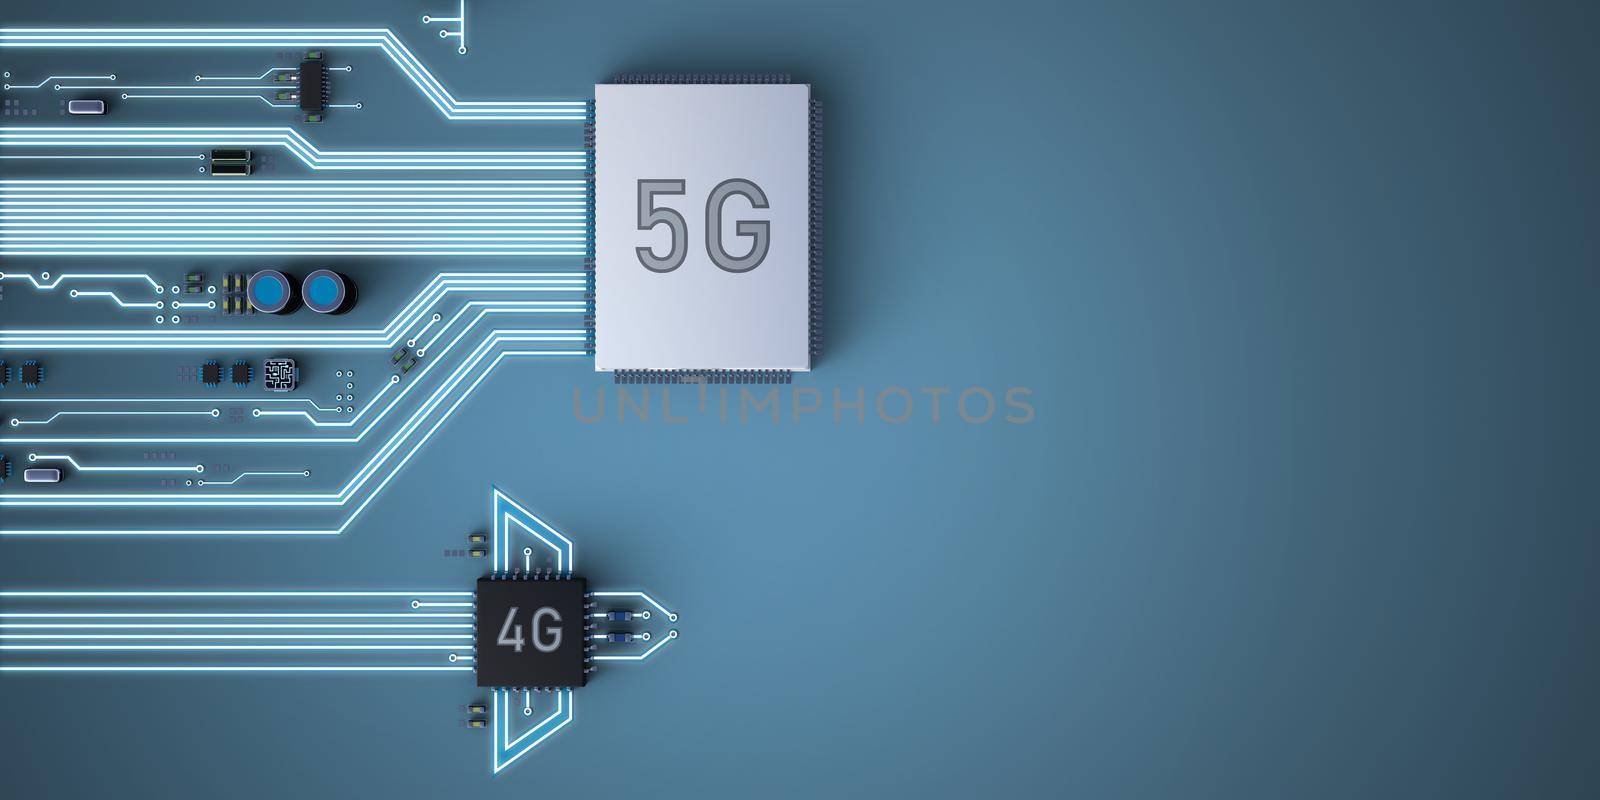 Abstract illustration of 5g and 4g processors competing with each other. by JOHN_ik